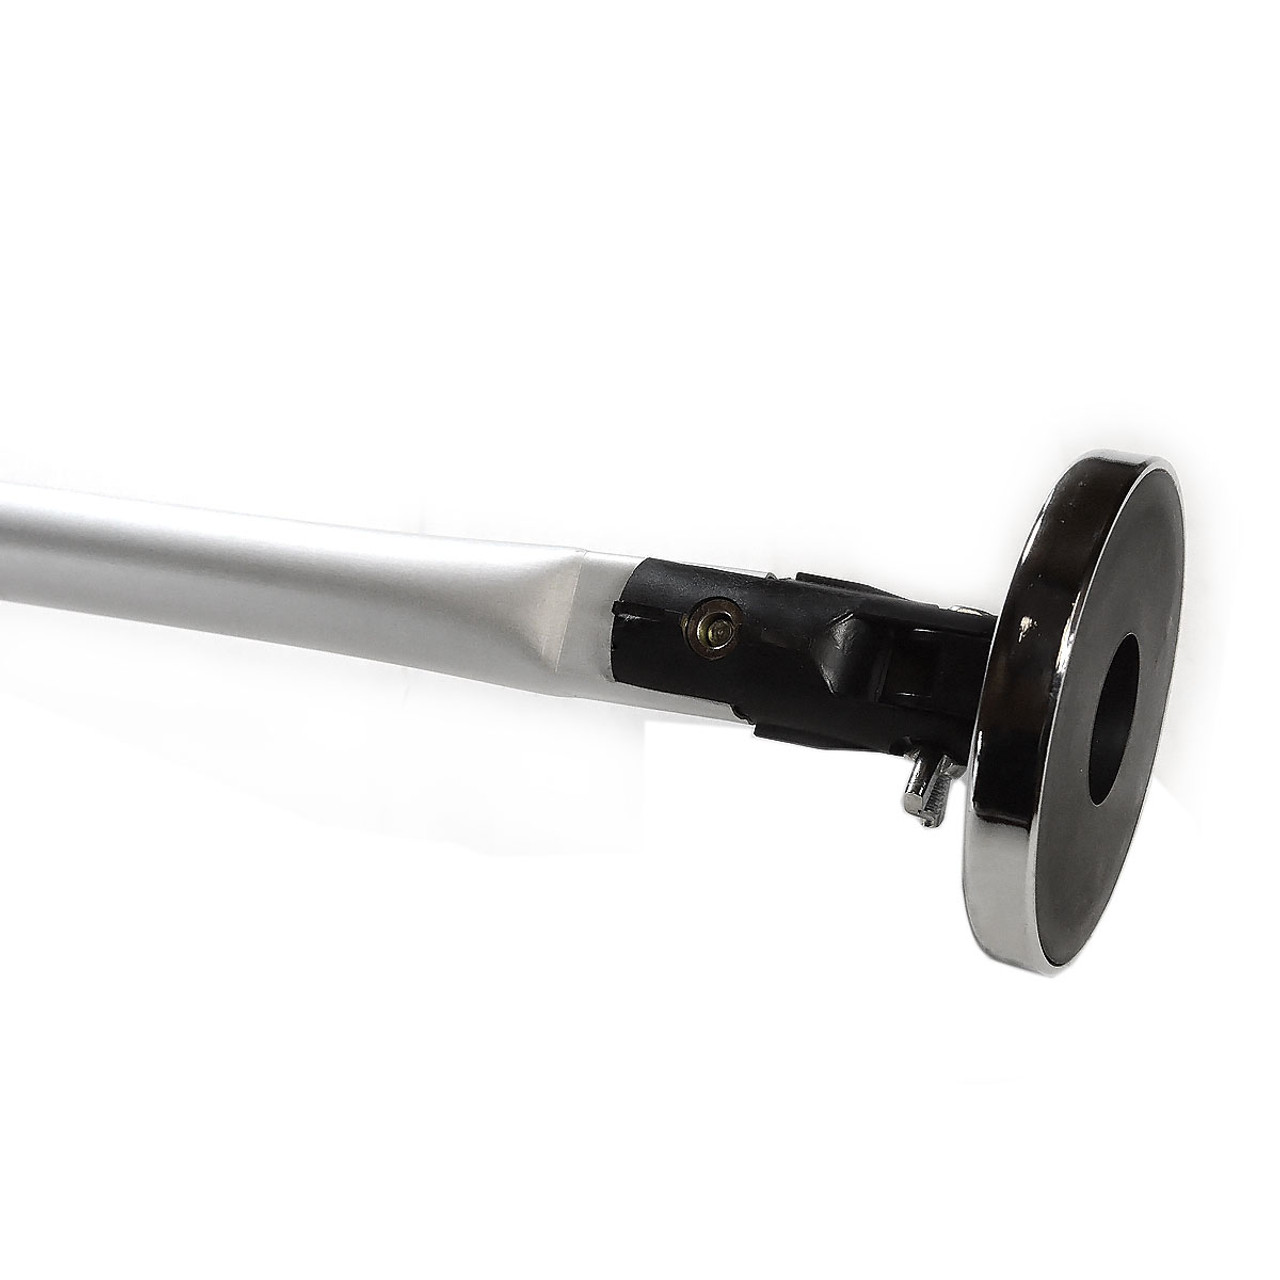 Magnetic pick up tool with telescope body